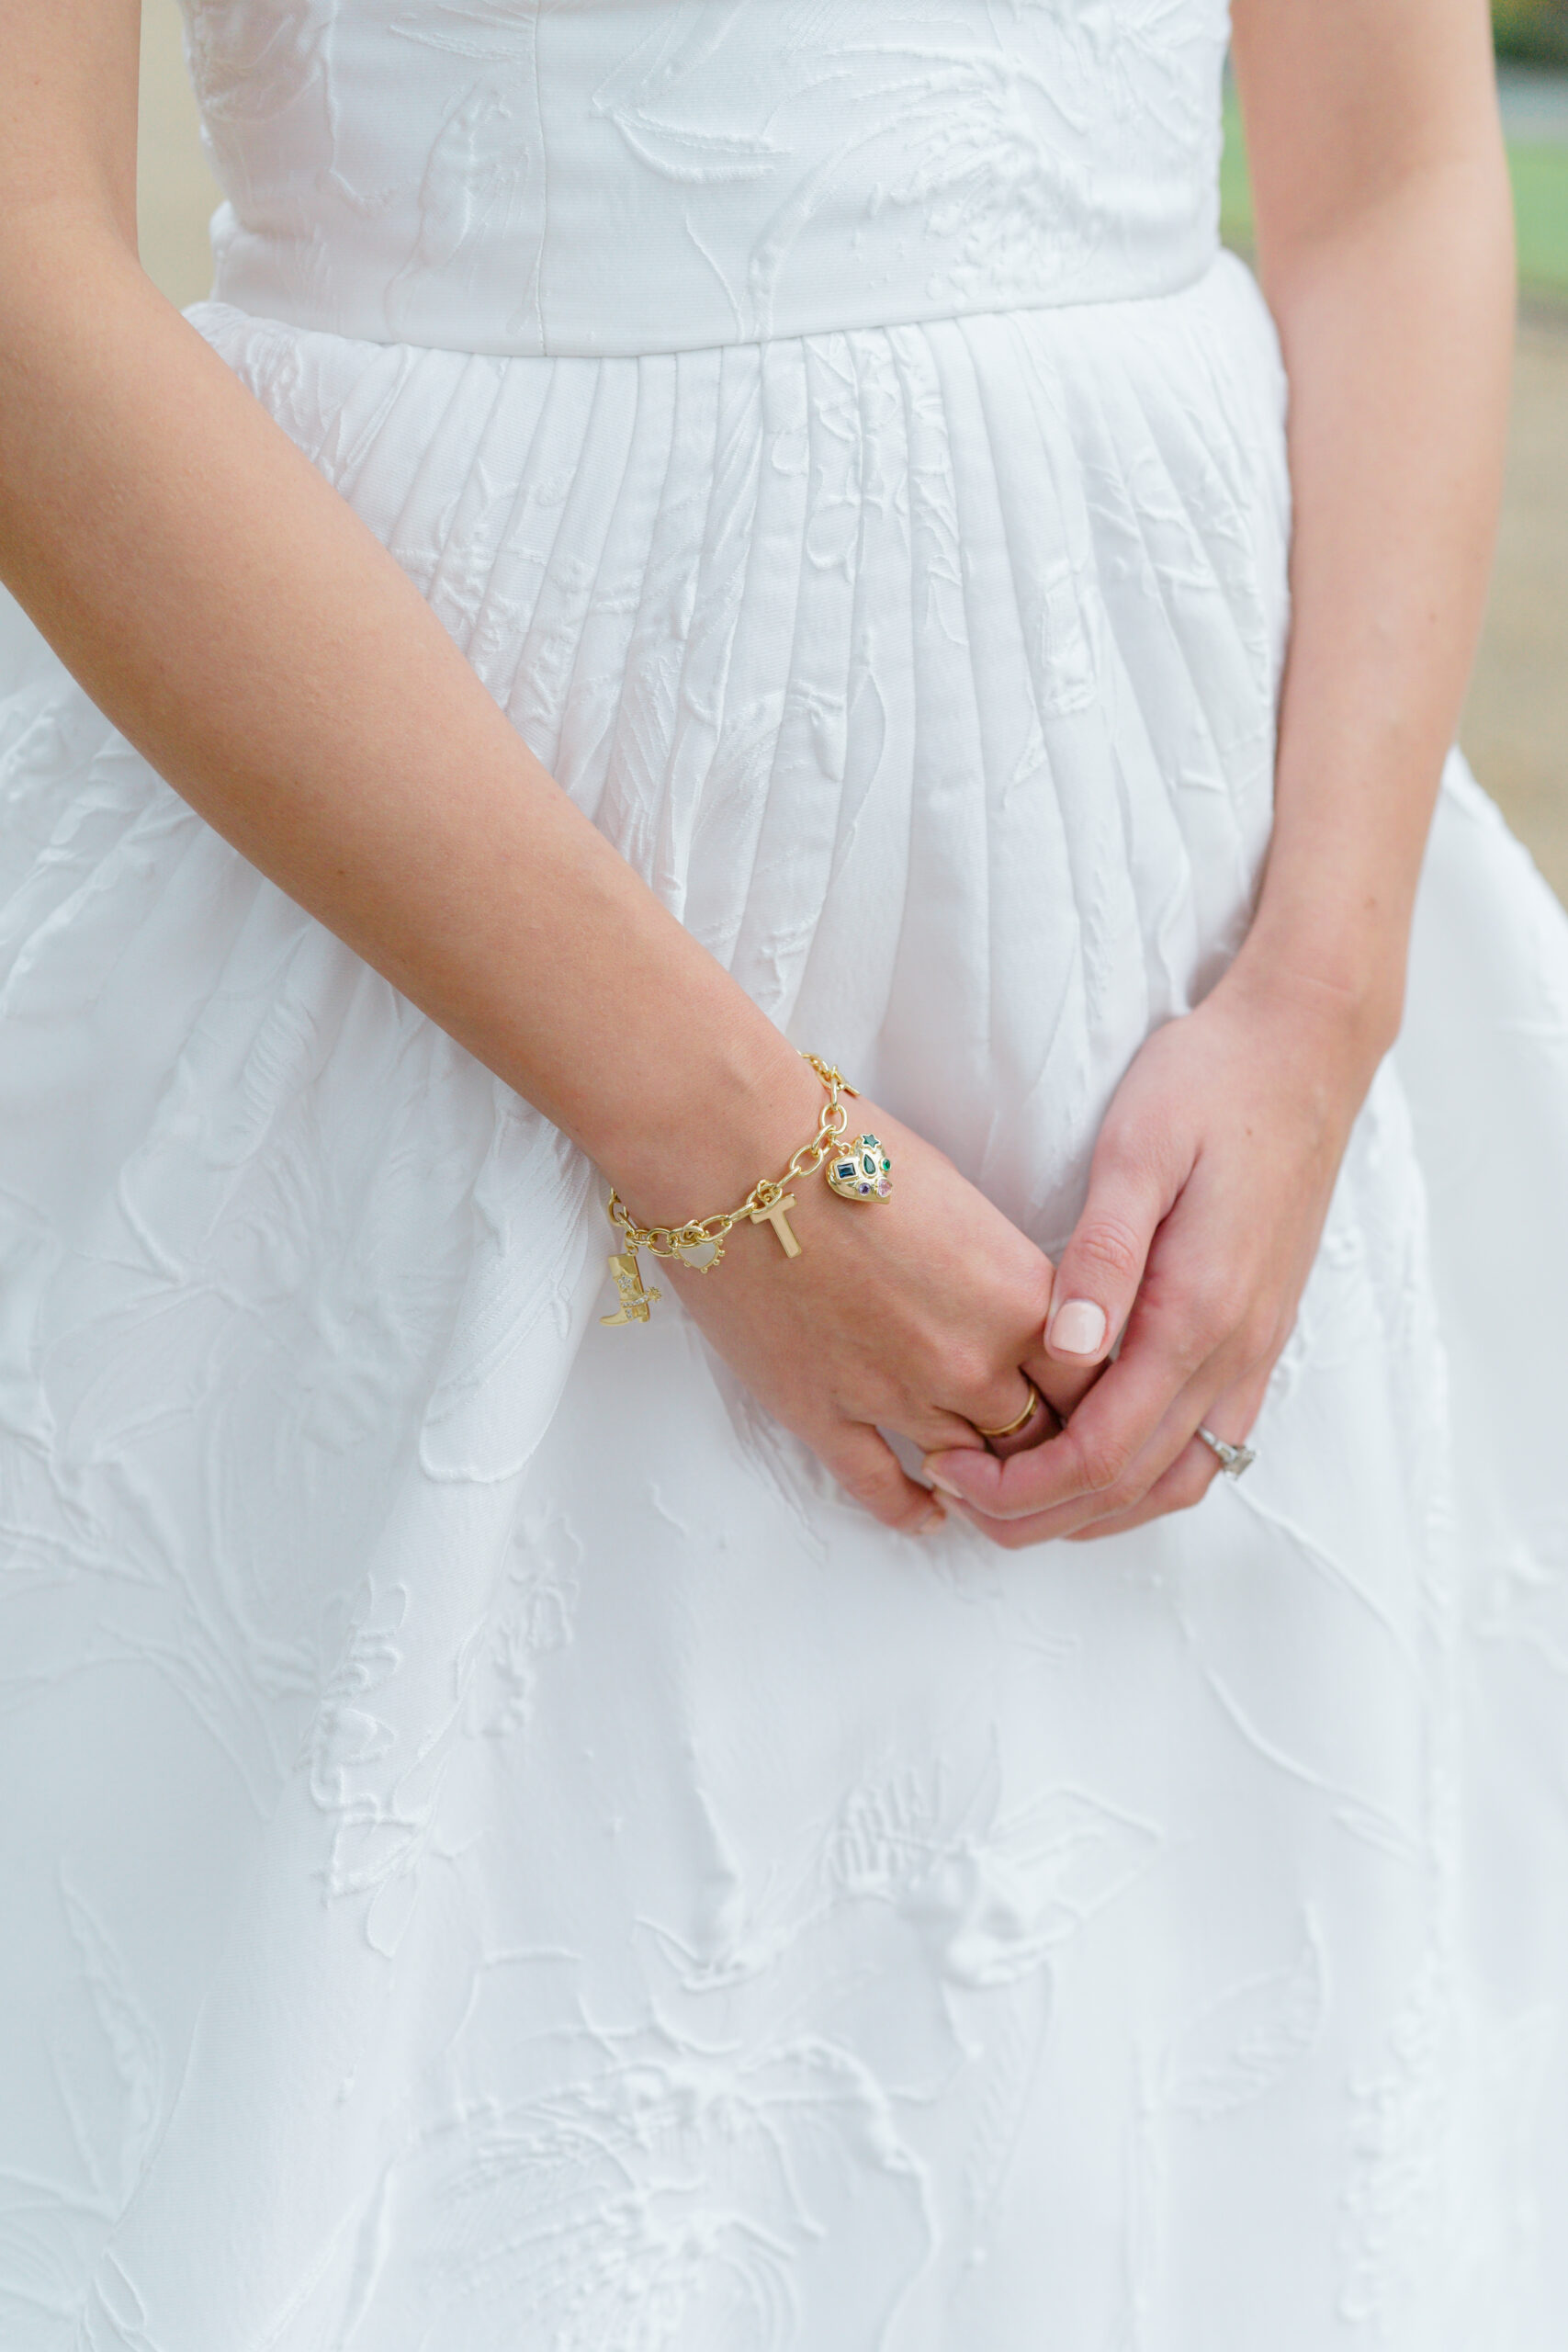 This bride made a custom charm bracelet on the morning of her wedding to wear during the day.